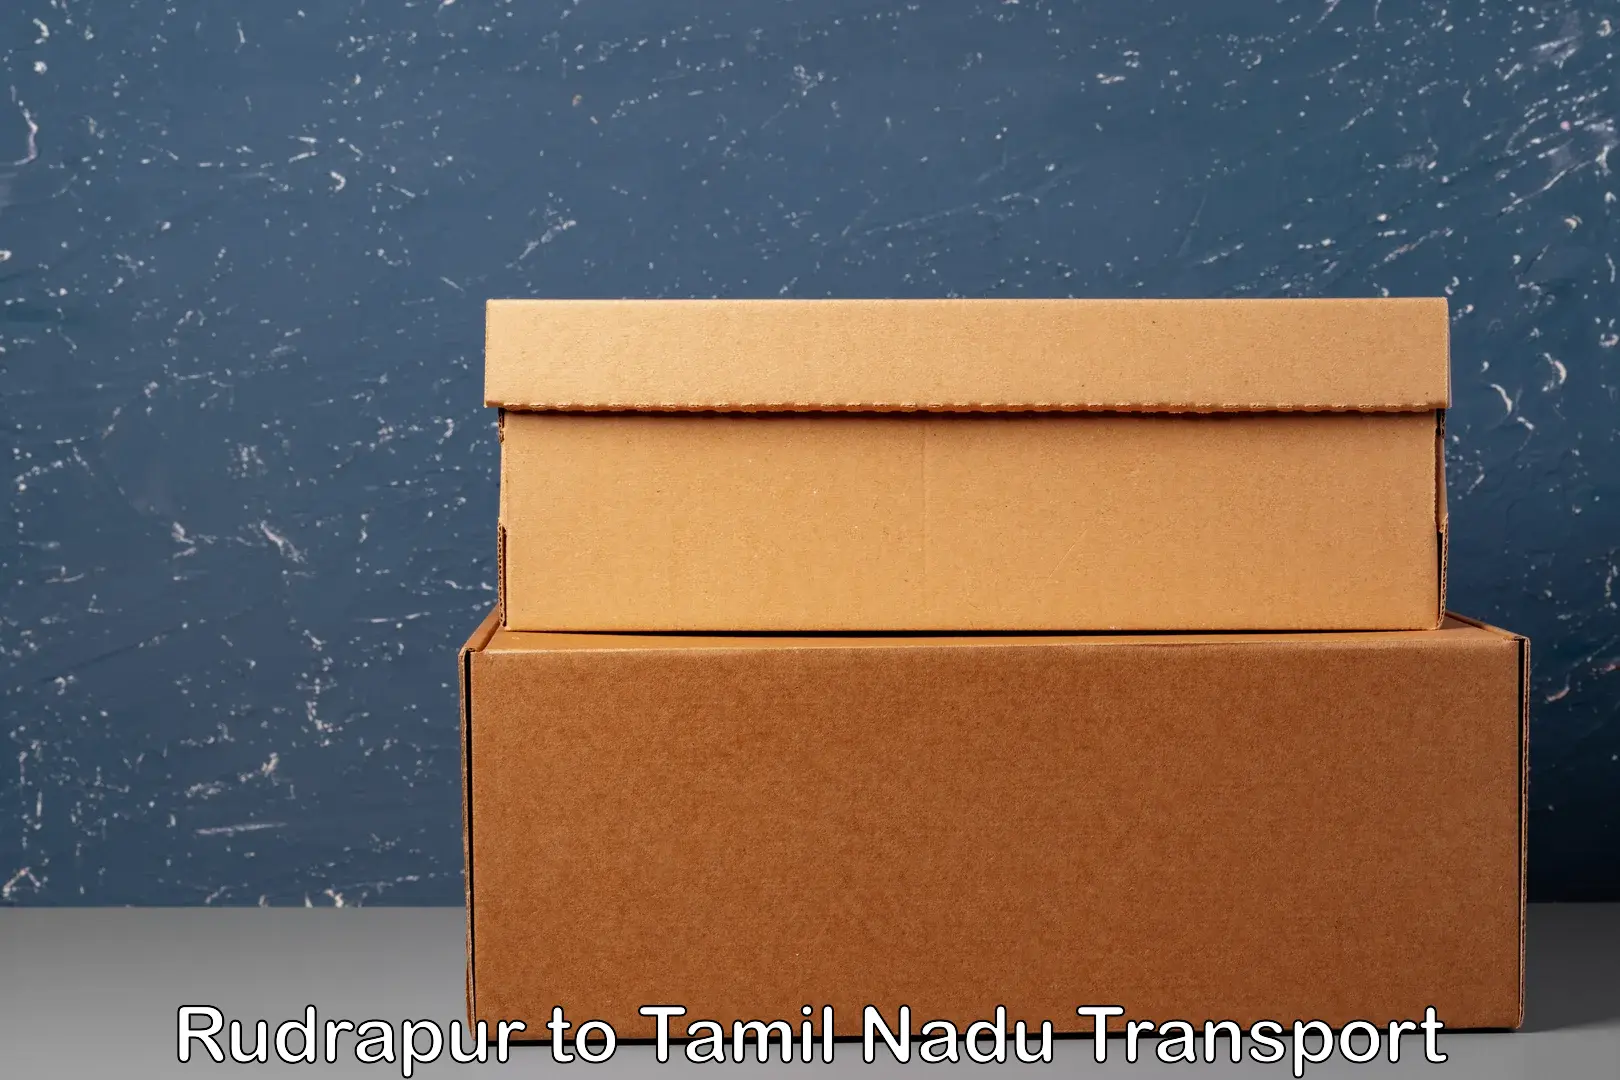 Delivery service Rudrapur to Tamil Nadu